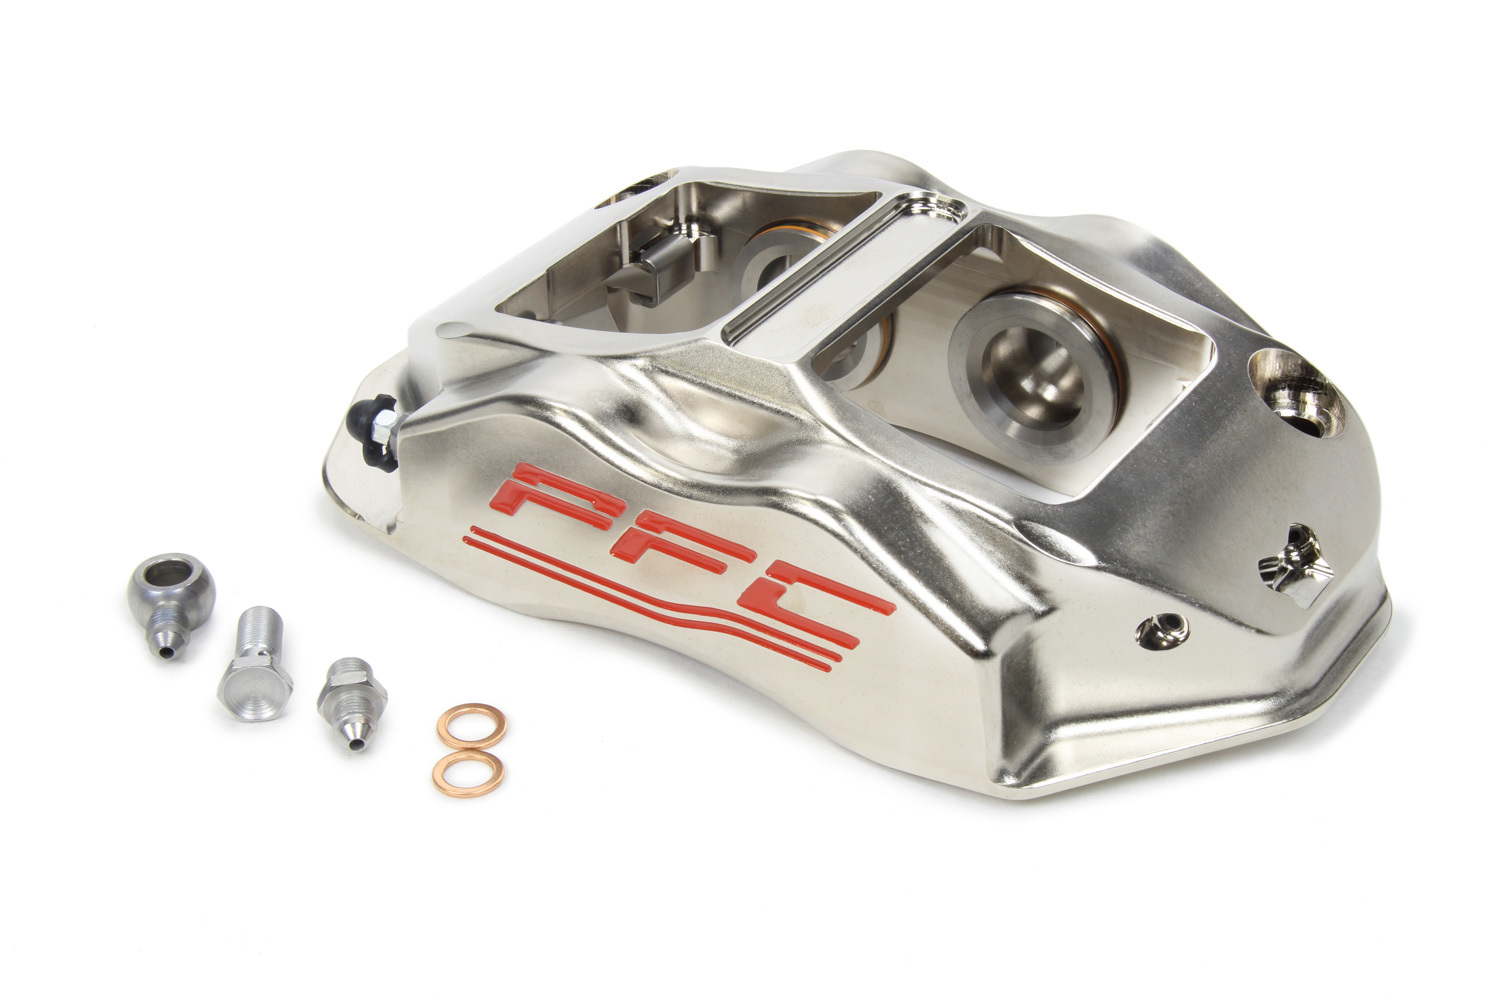 Performance Friction 94.323.290.365.11 Brake Caliper, ZR94, Driver Side, Trailing, 4 Piston, Aluminum, Nickel Plated, 12.716 in OD, 1.250 in Thick Rotor, 7.00 in Radial Mount, Each